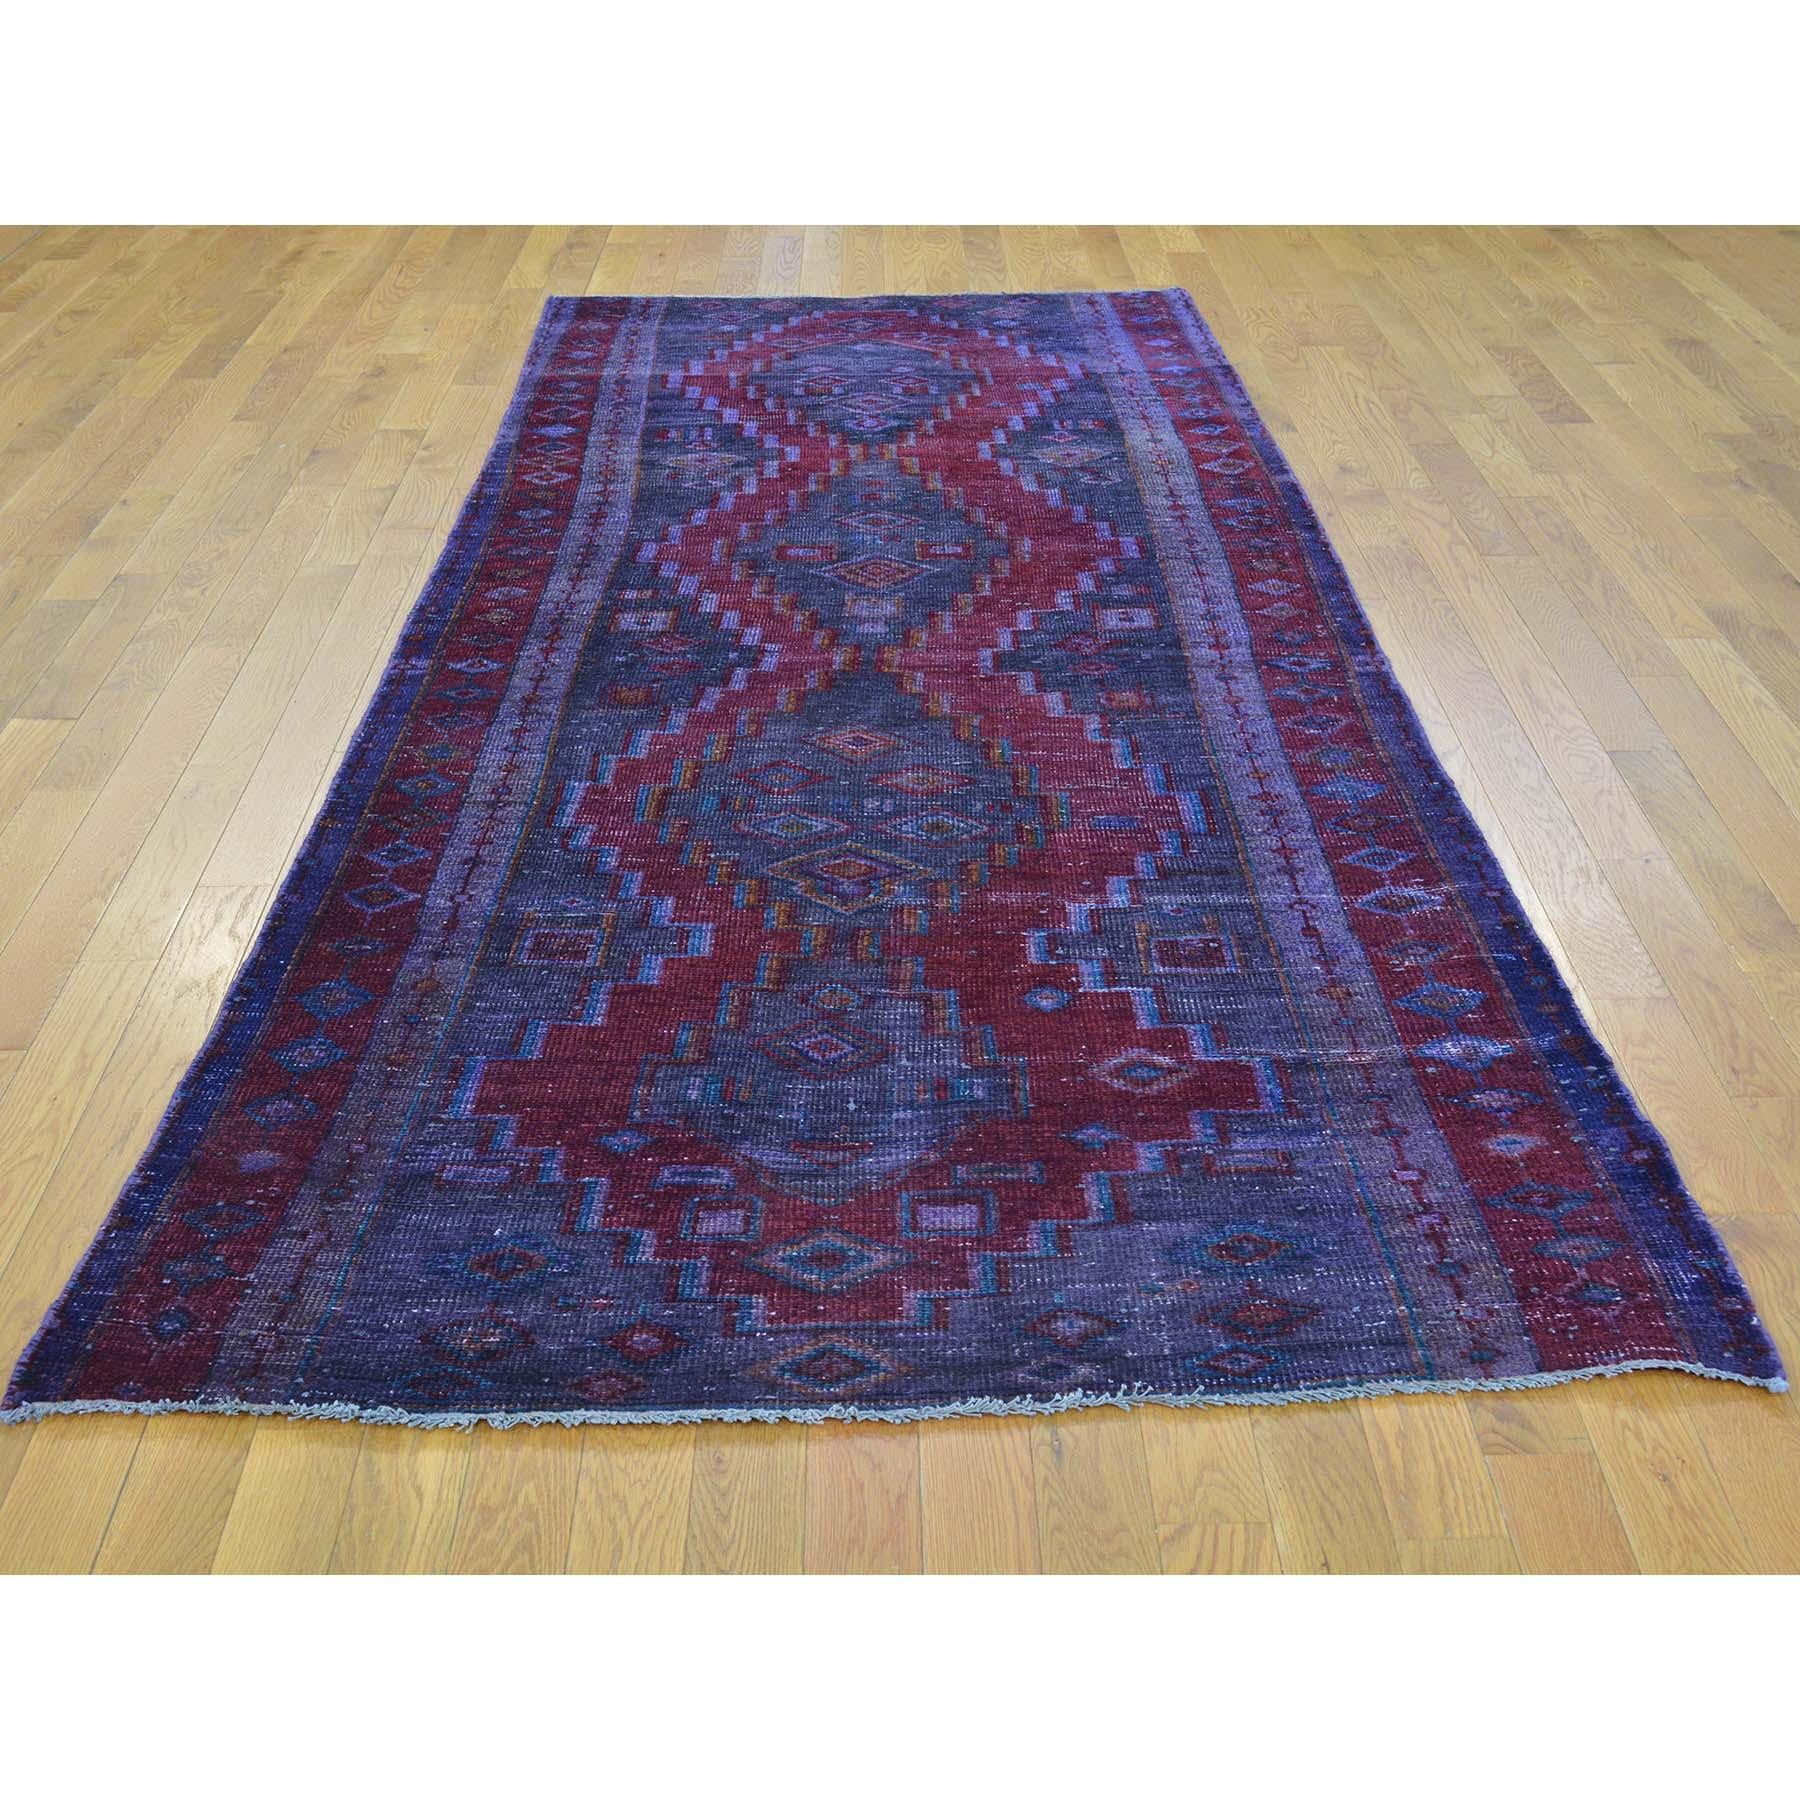 This is a truly genuine one-of-a-kind semi antique Persian Hamadan overdyed vintage wide runner rug. It has been knotted for months and months in the centuries-old Persian weaving craftsmanship techniques by expert artisans.

Primary materials: Worn